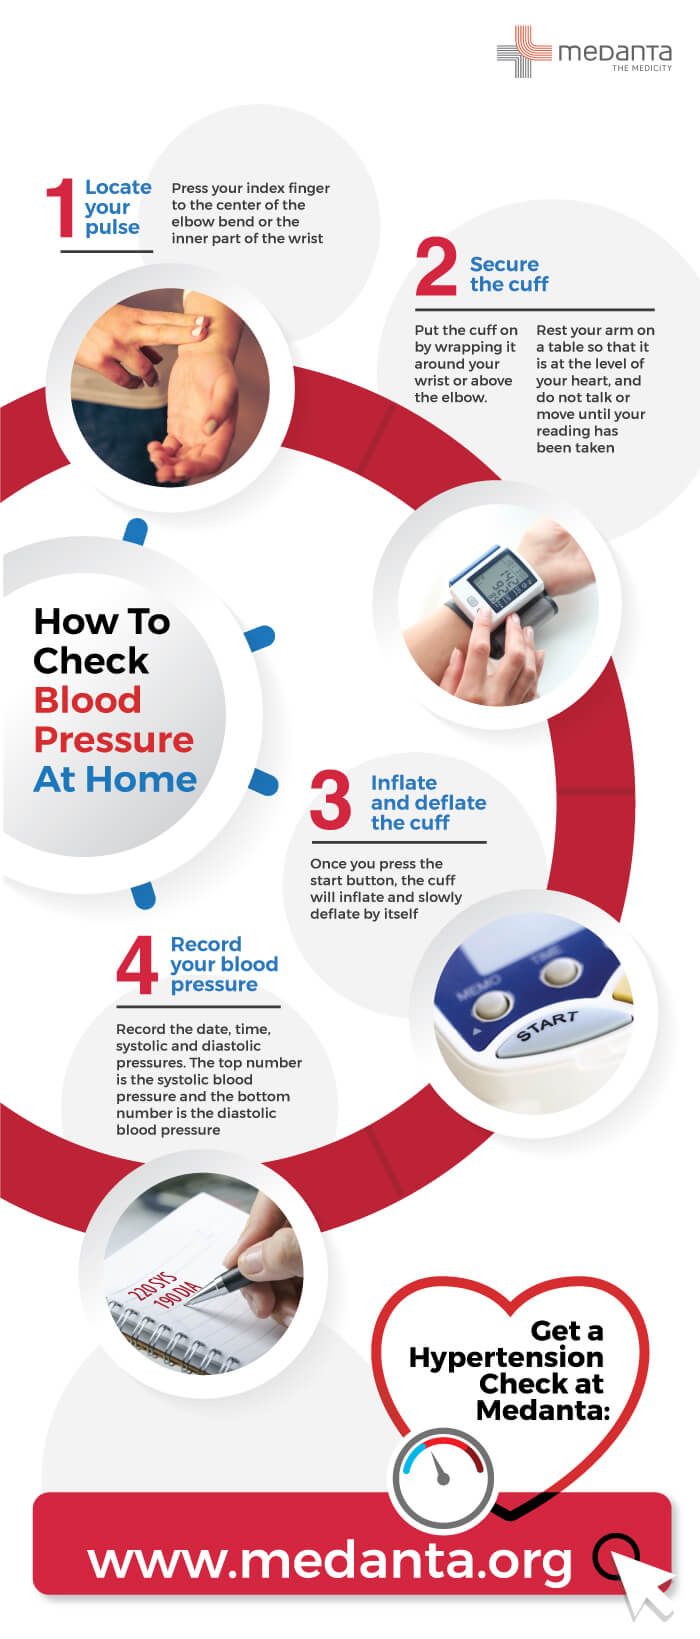 Step-by-Step: Checking Blood Pressure at Home Made Easy